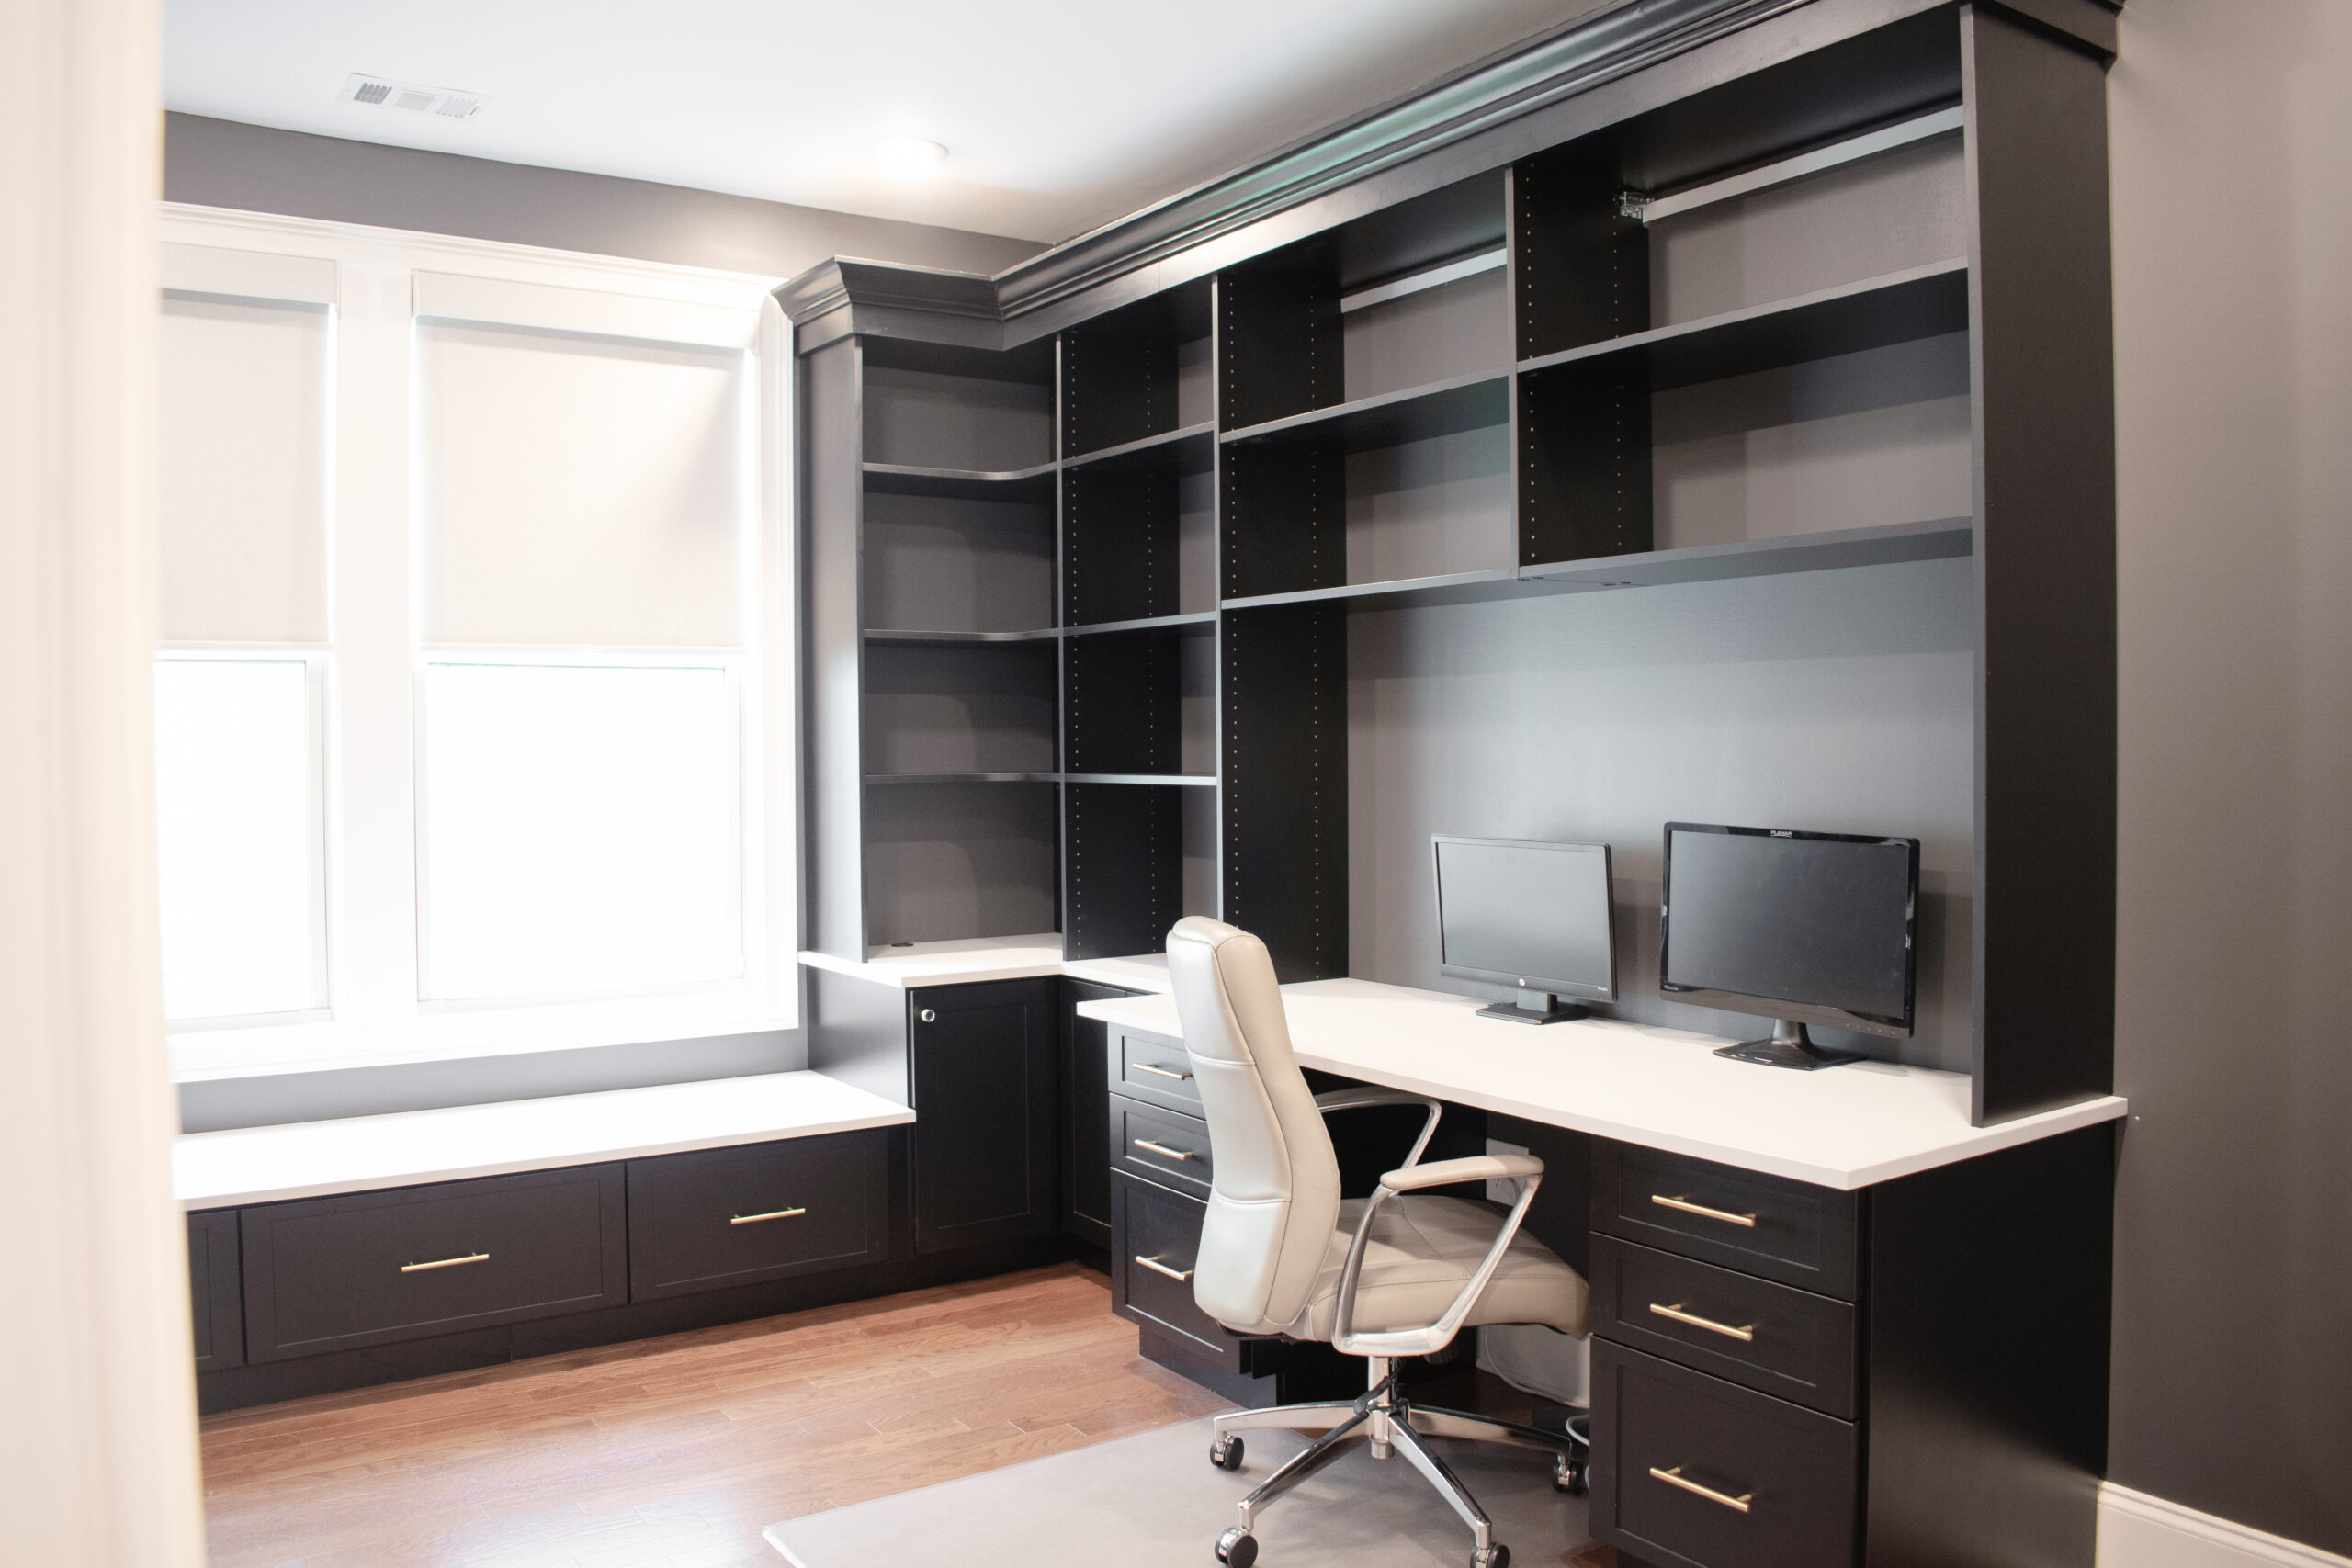 Custom black wraparound desk with bookshelves, a bench, file drawers, normal drawers, crown molding, cabinets, and a white countertop.